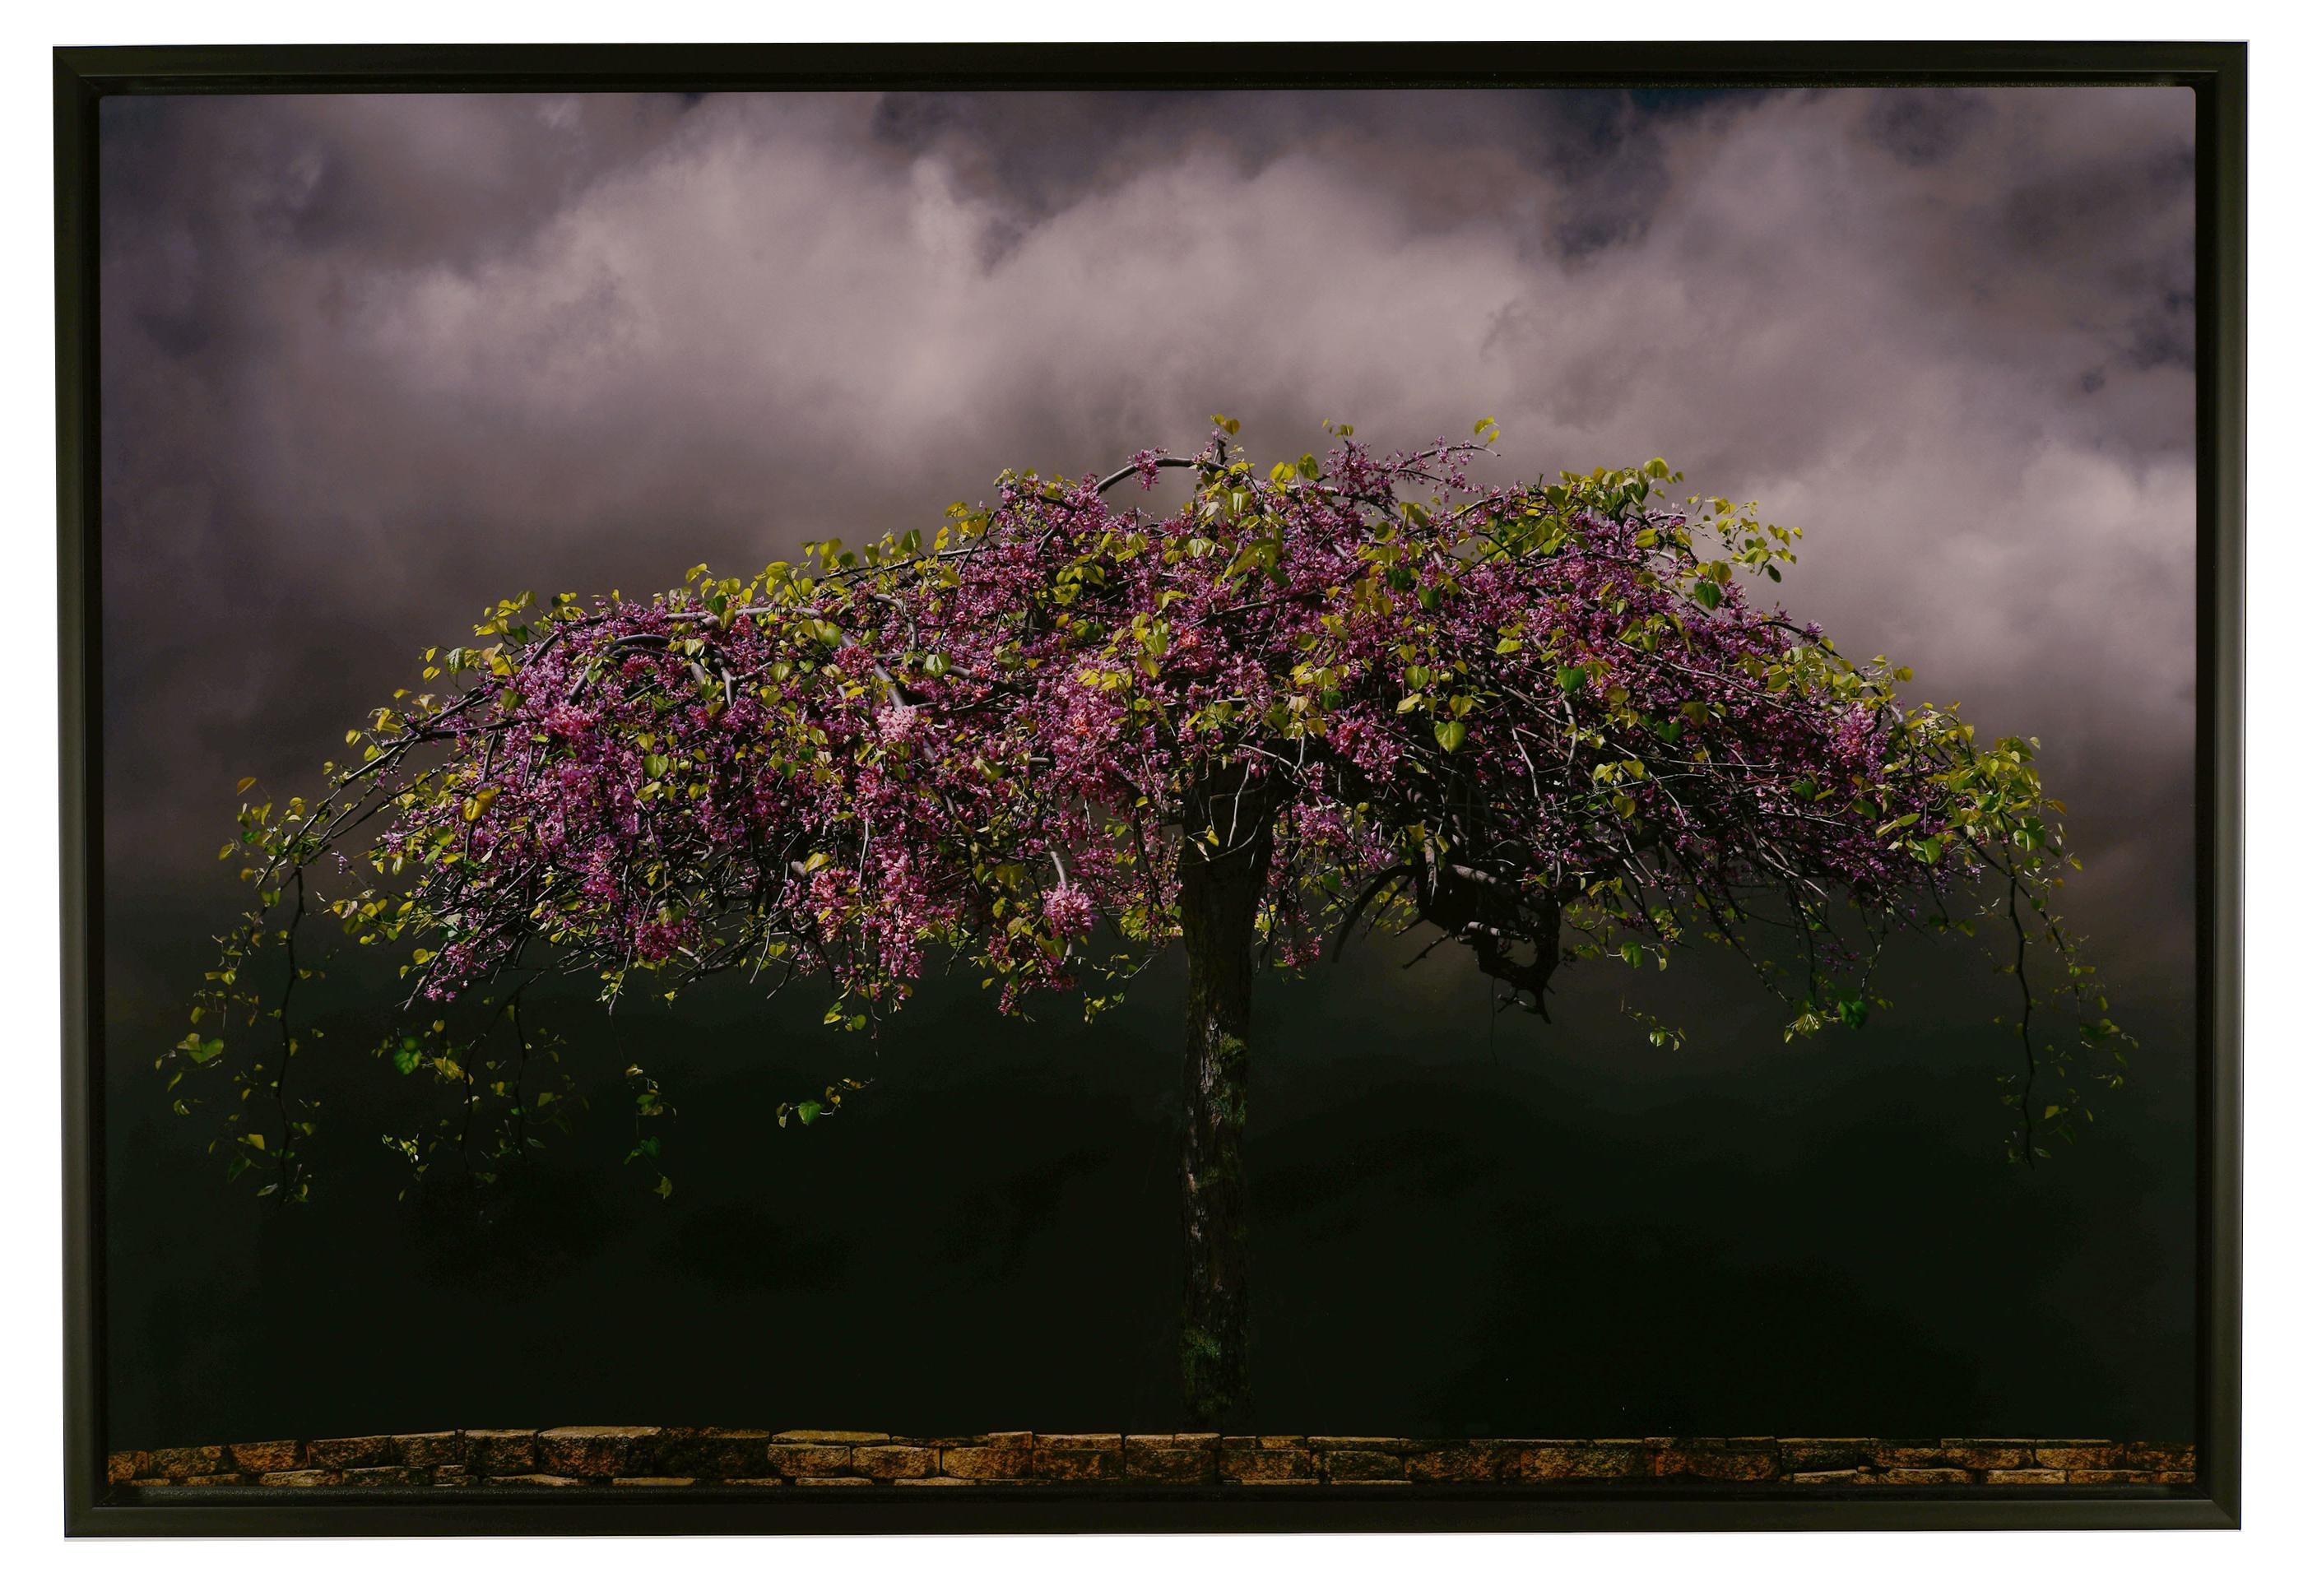 Pareidolic Clouds - Large Scale Glossy Photo on Aluminum with Blooming Tree - Photograph by Mary Block